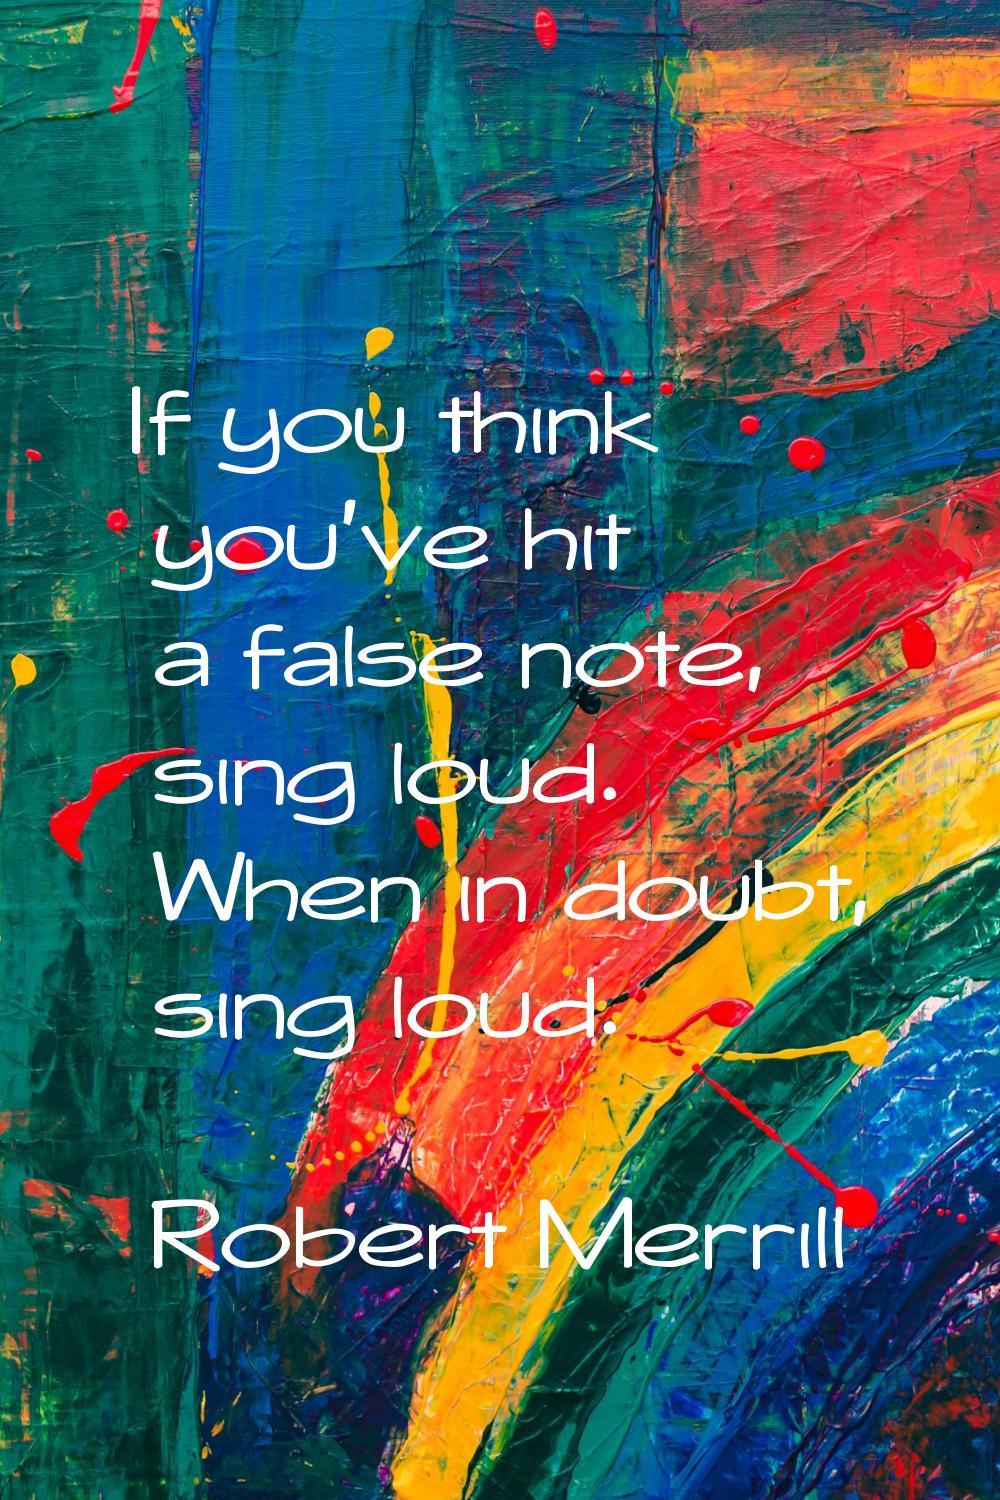 If you think you've hit a false note, sing loud. When in doubt, sing loud.